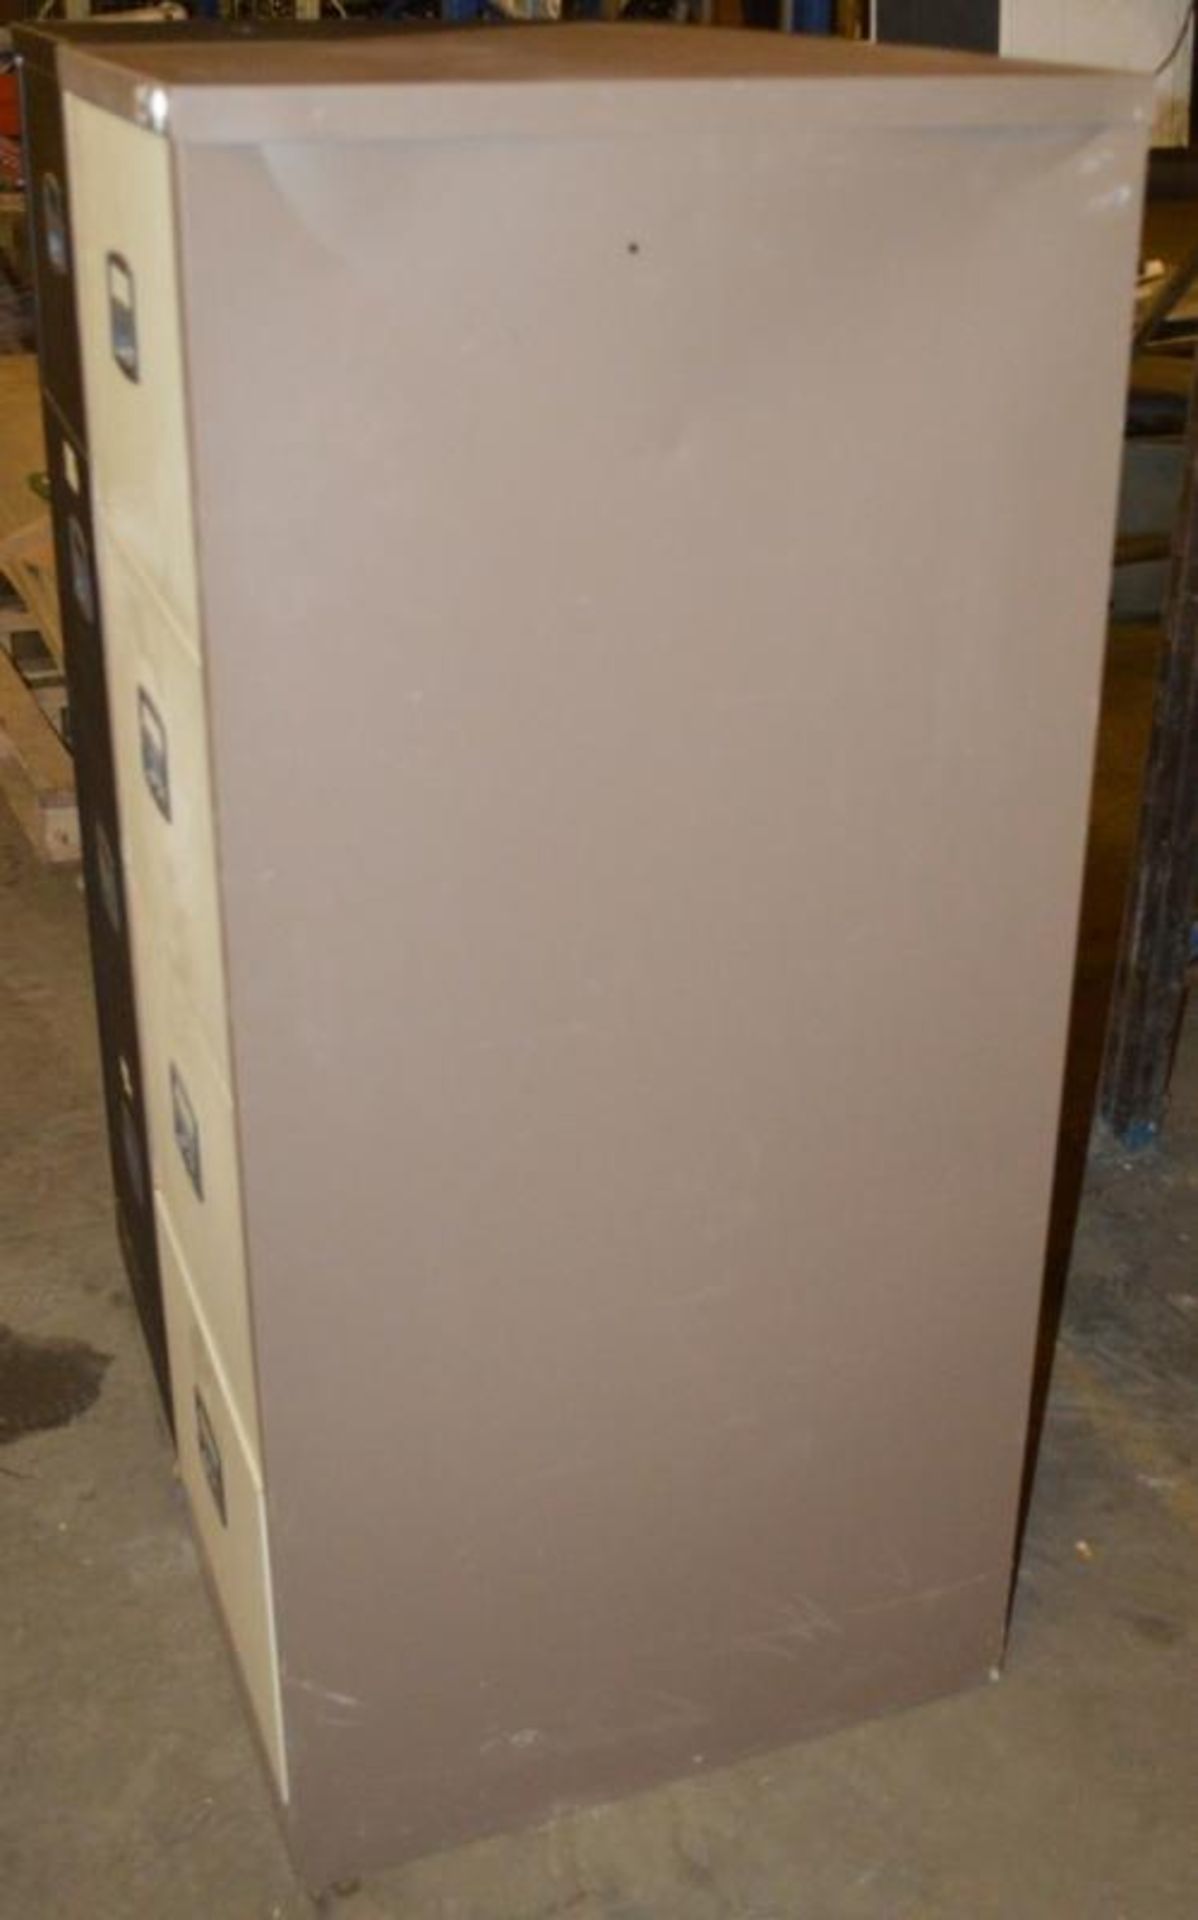 2 x Metal Filing Cabinets - Dimensions: H132 x W47 x D63cm - Used, Open, No Keys - Low Start, No Res - Image 2 of 5